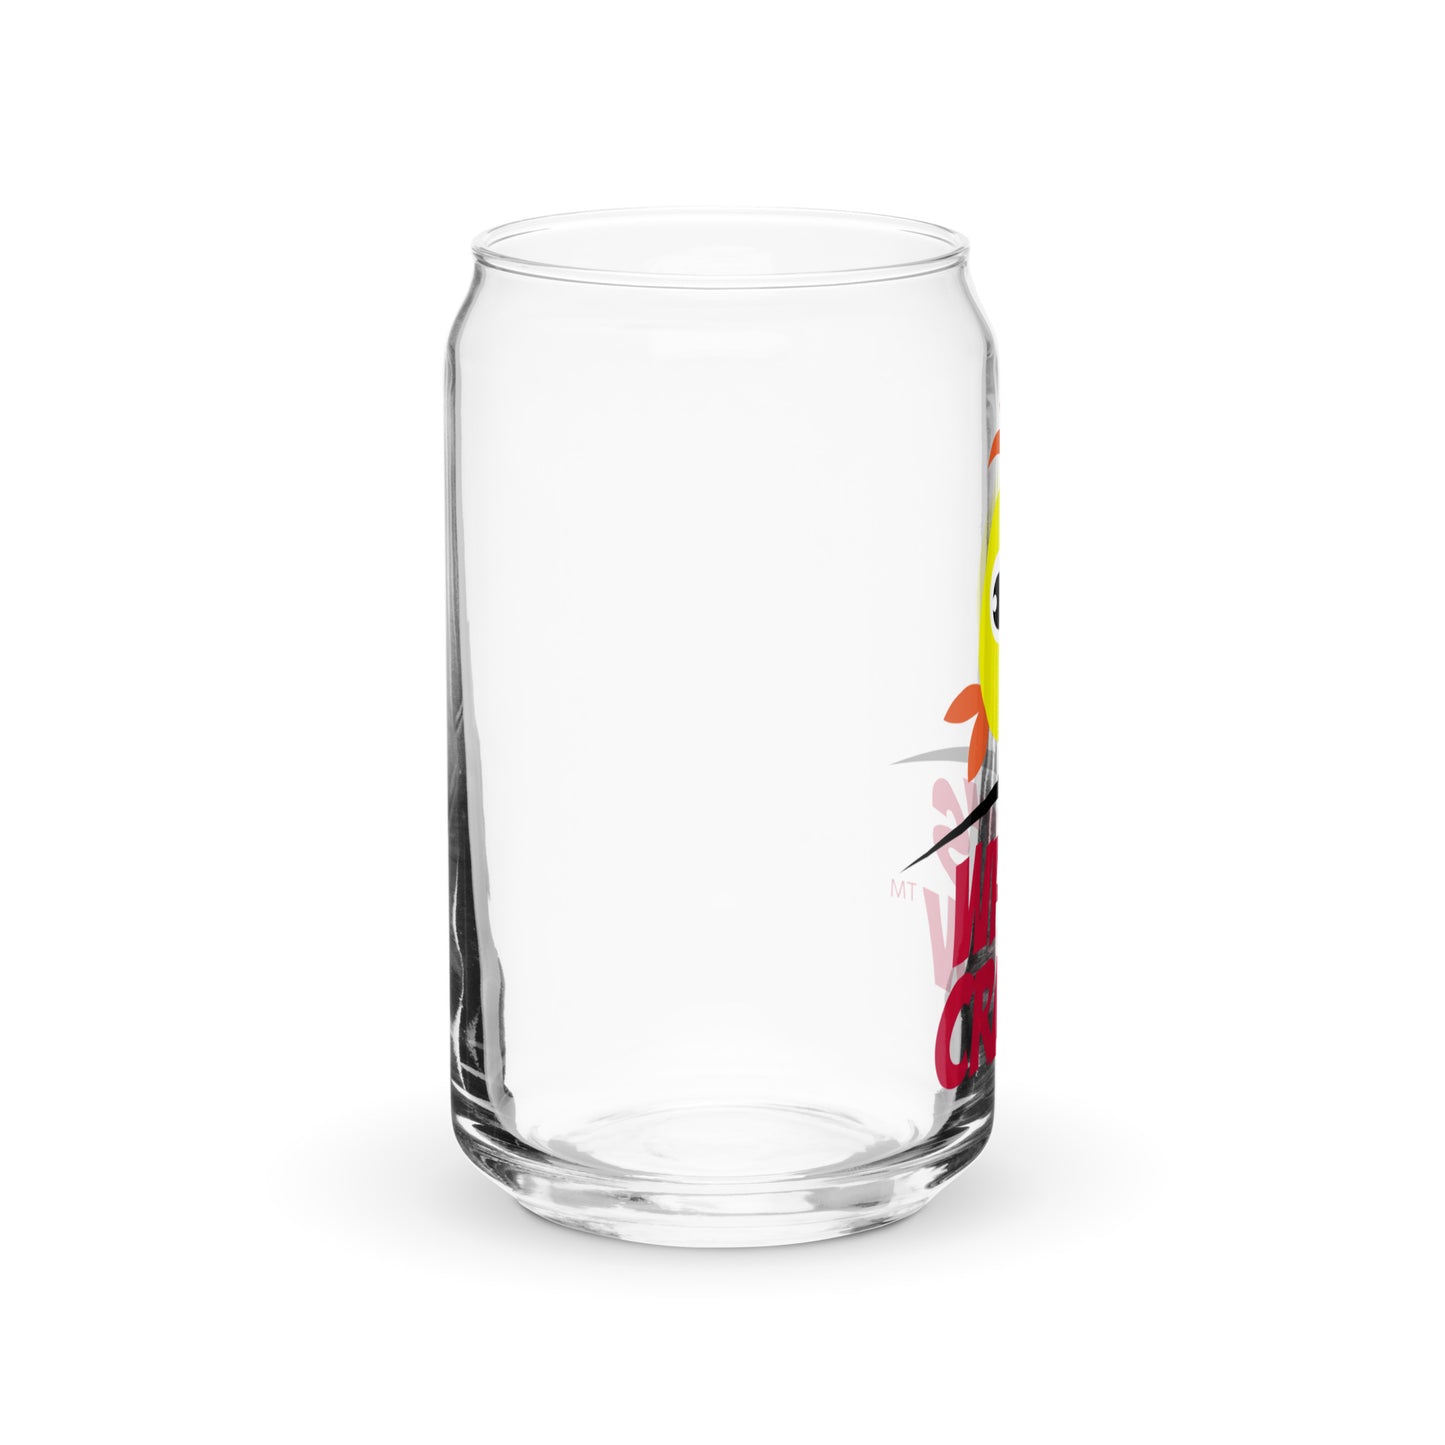 WC Can-shaped glass